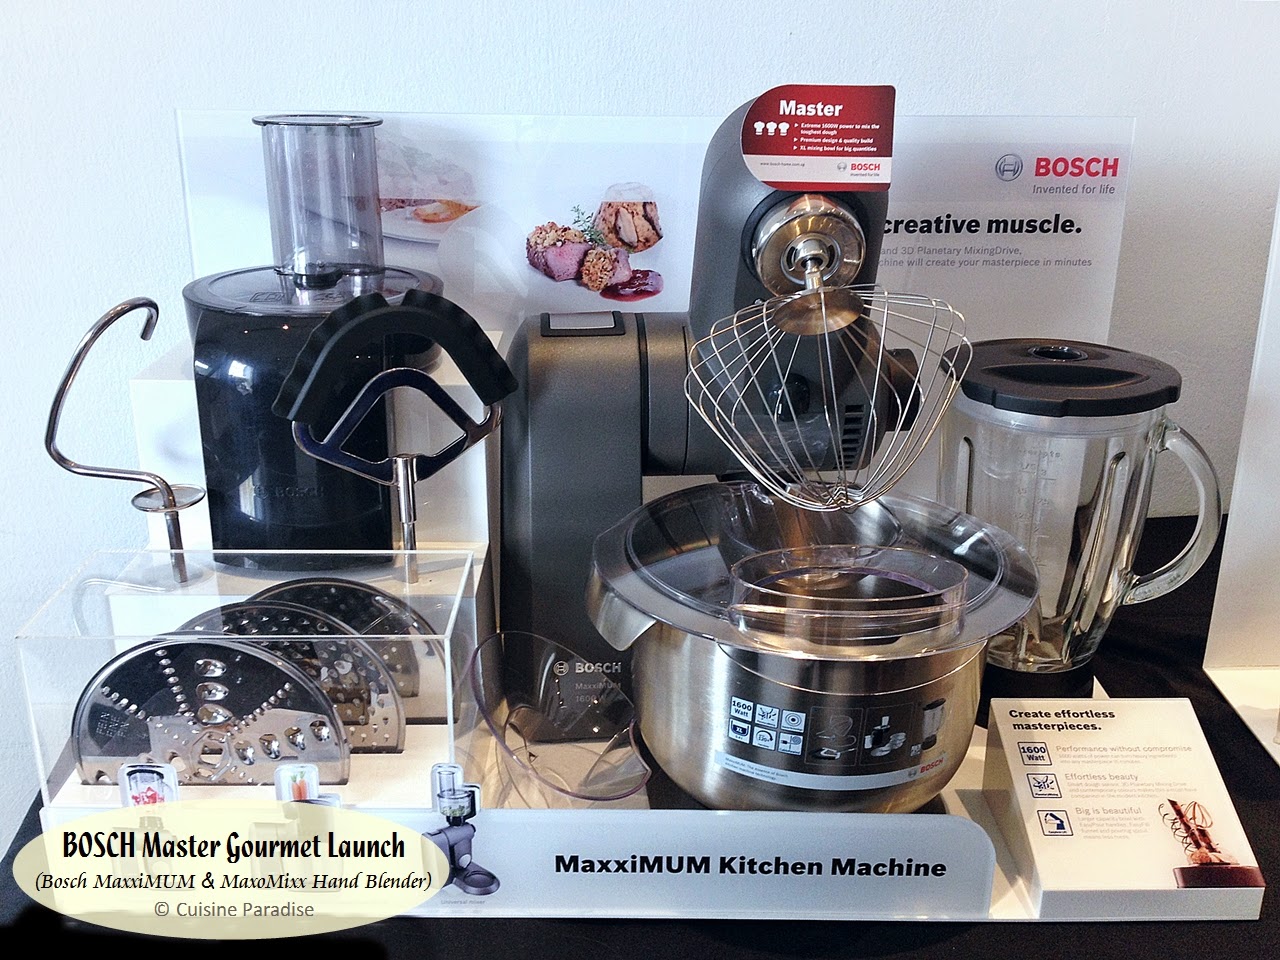 Havbrasme Stationær præmie Cuisine Paradise | Singapore Food Blog | Recipes, Reviews And Travel: [With  Recipes] The New Bosch MaxxiMUM Kitchen Machine and MaxoMixx Hand Blender